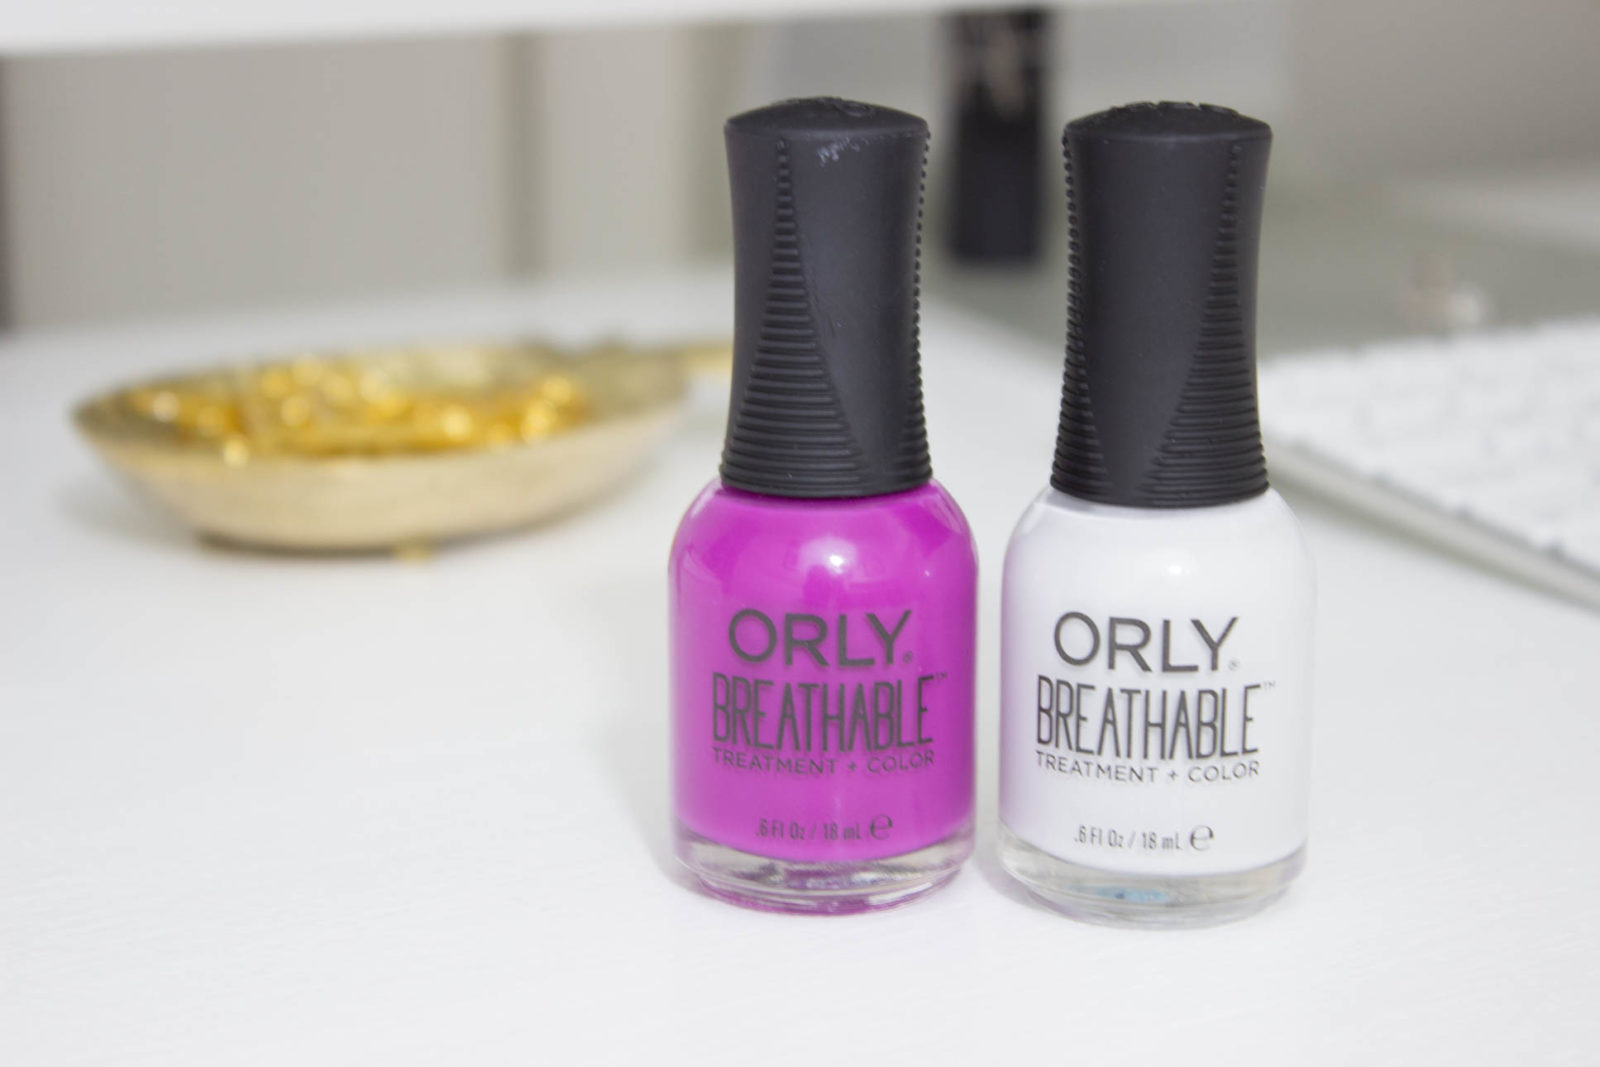 7. "Orly Breathable Treatment + Color in Barely There" - wide 4